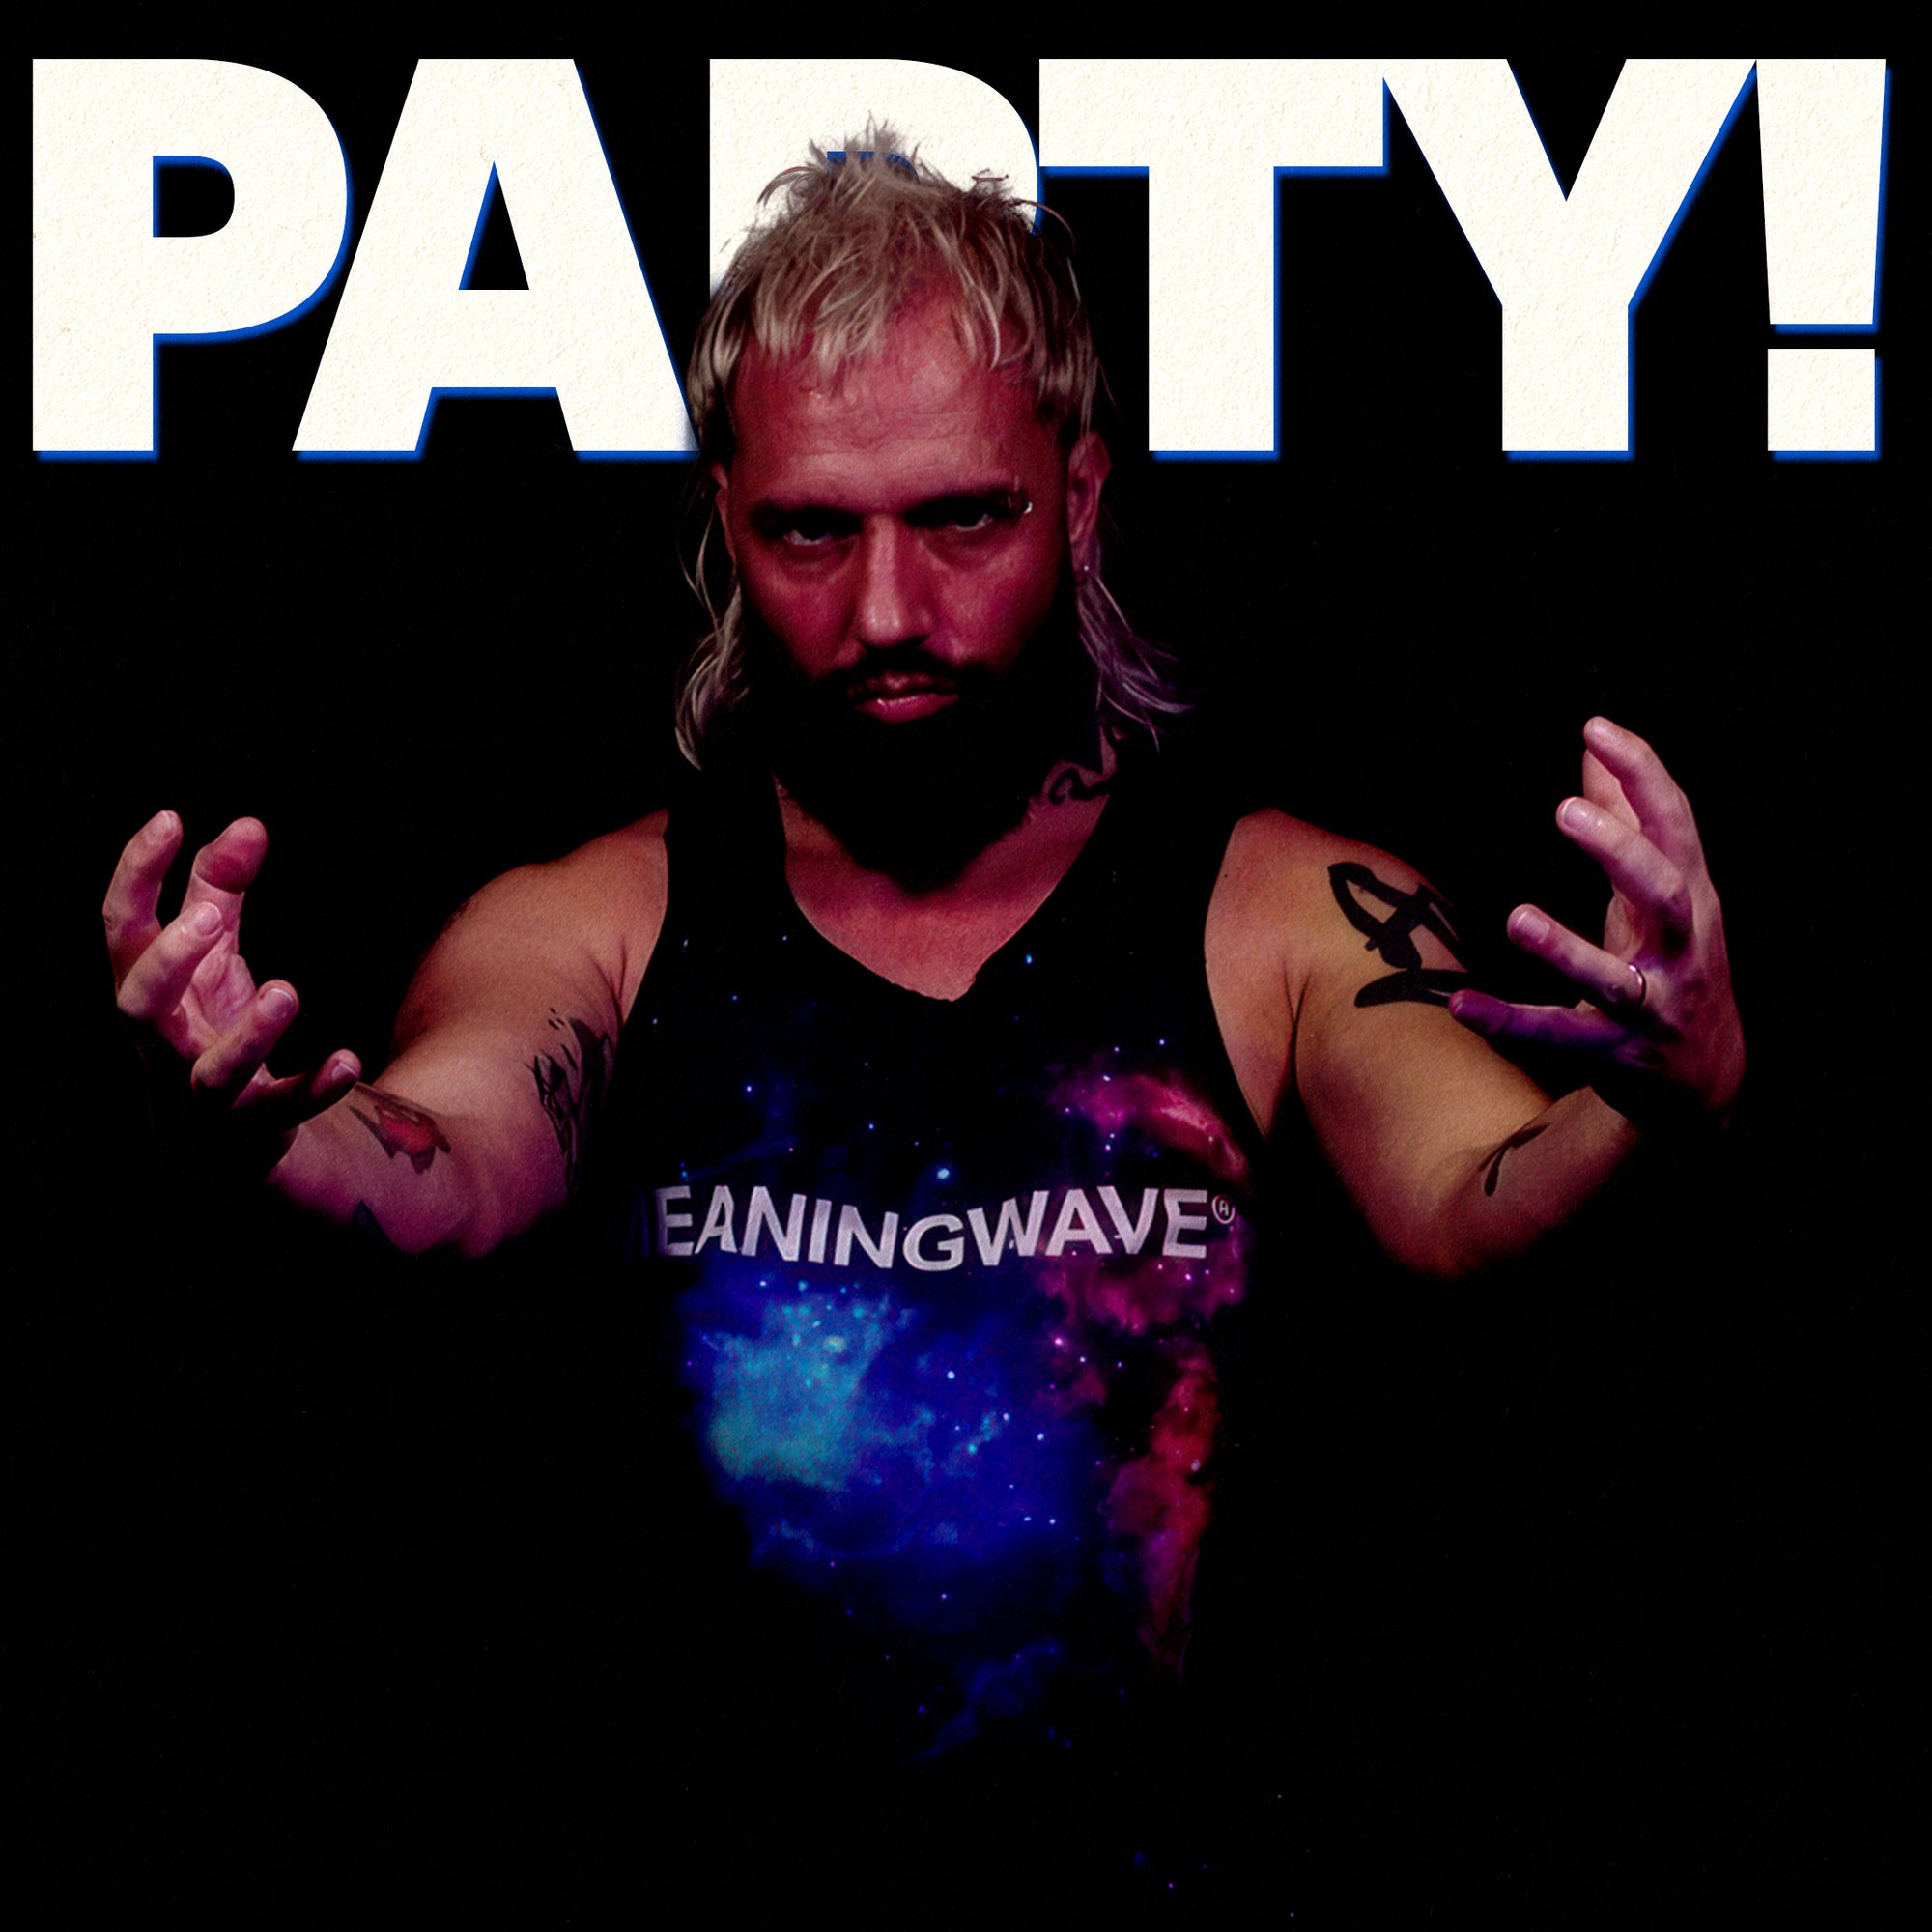 ＰＡＲＴＹ！ | MEANINGSTREAM 467